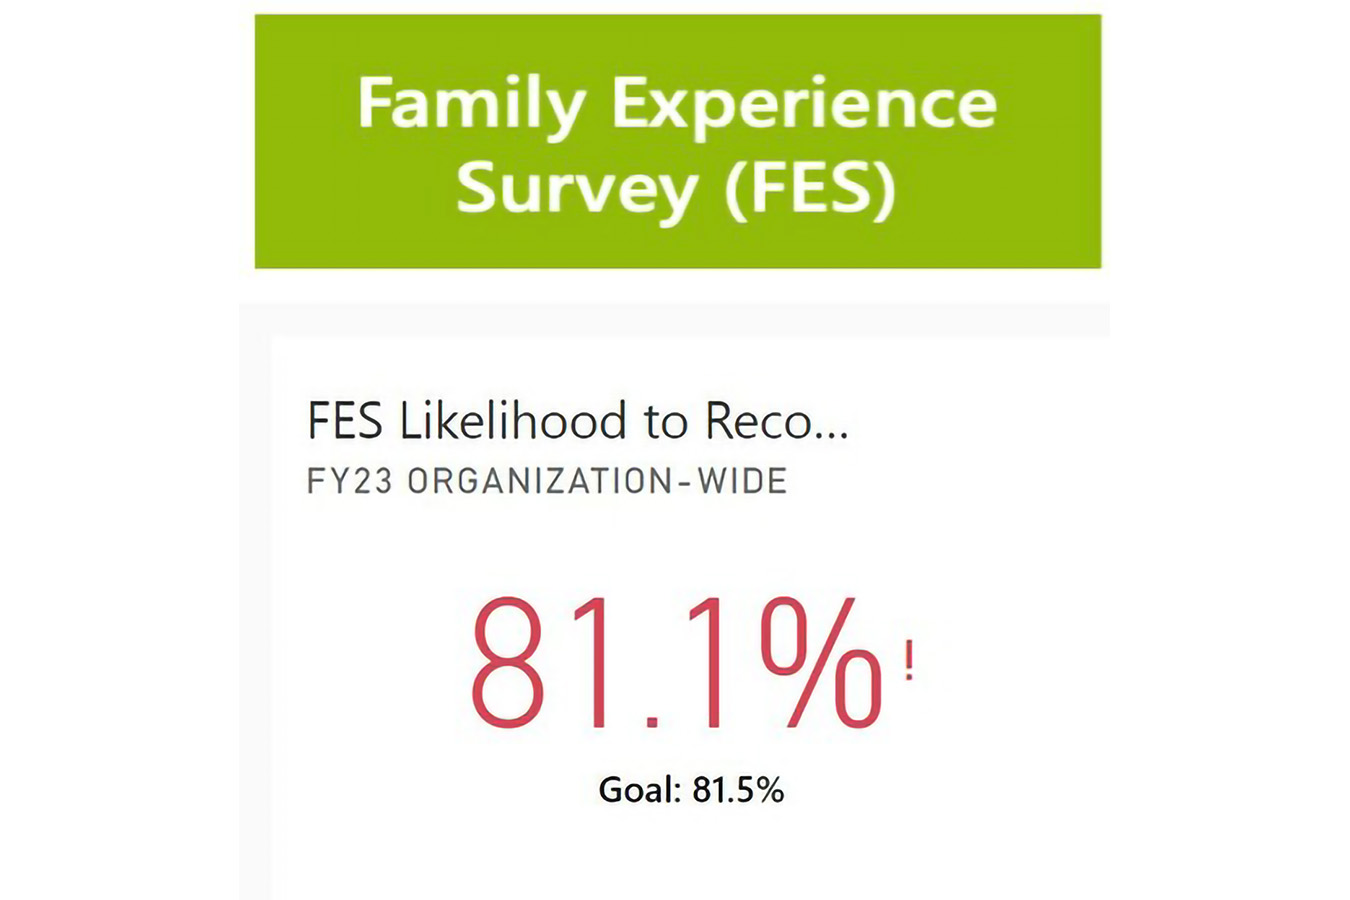 FES is at 81.1%, short of the goal of 81.5%